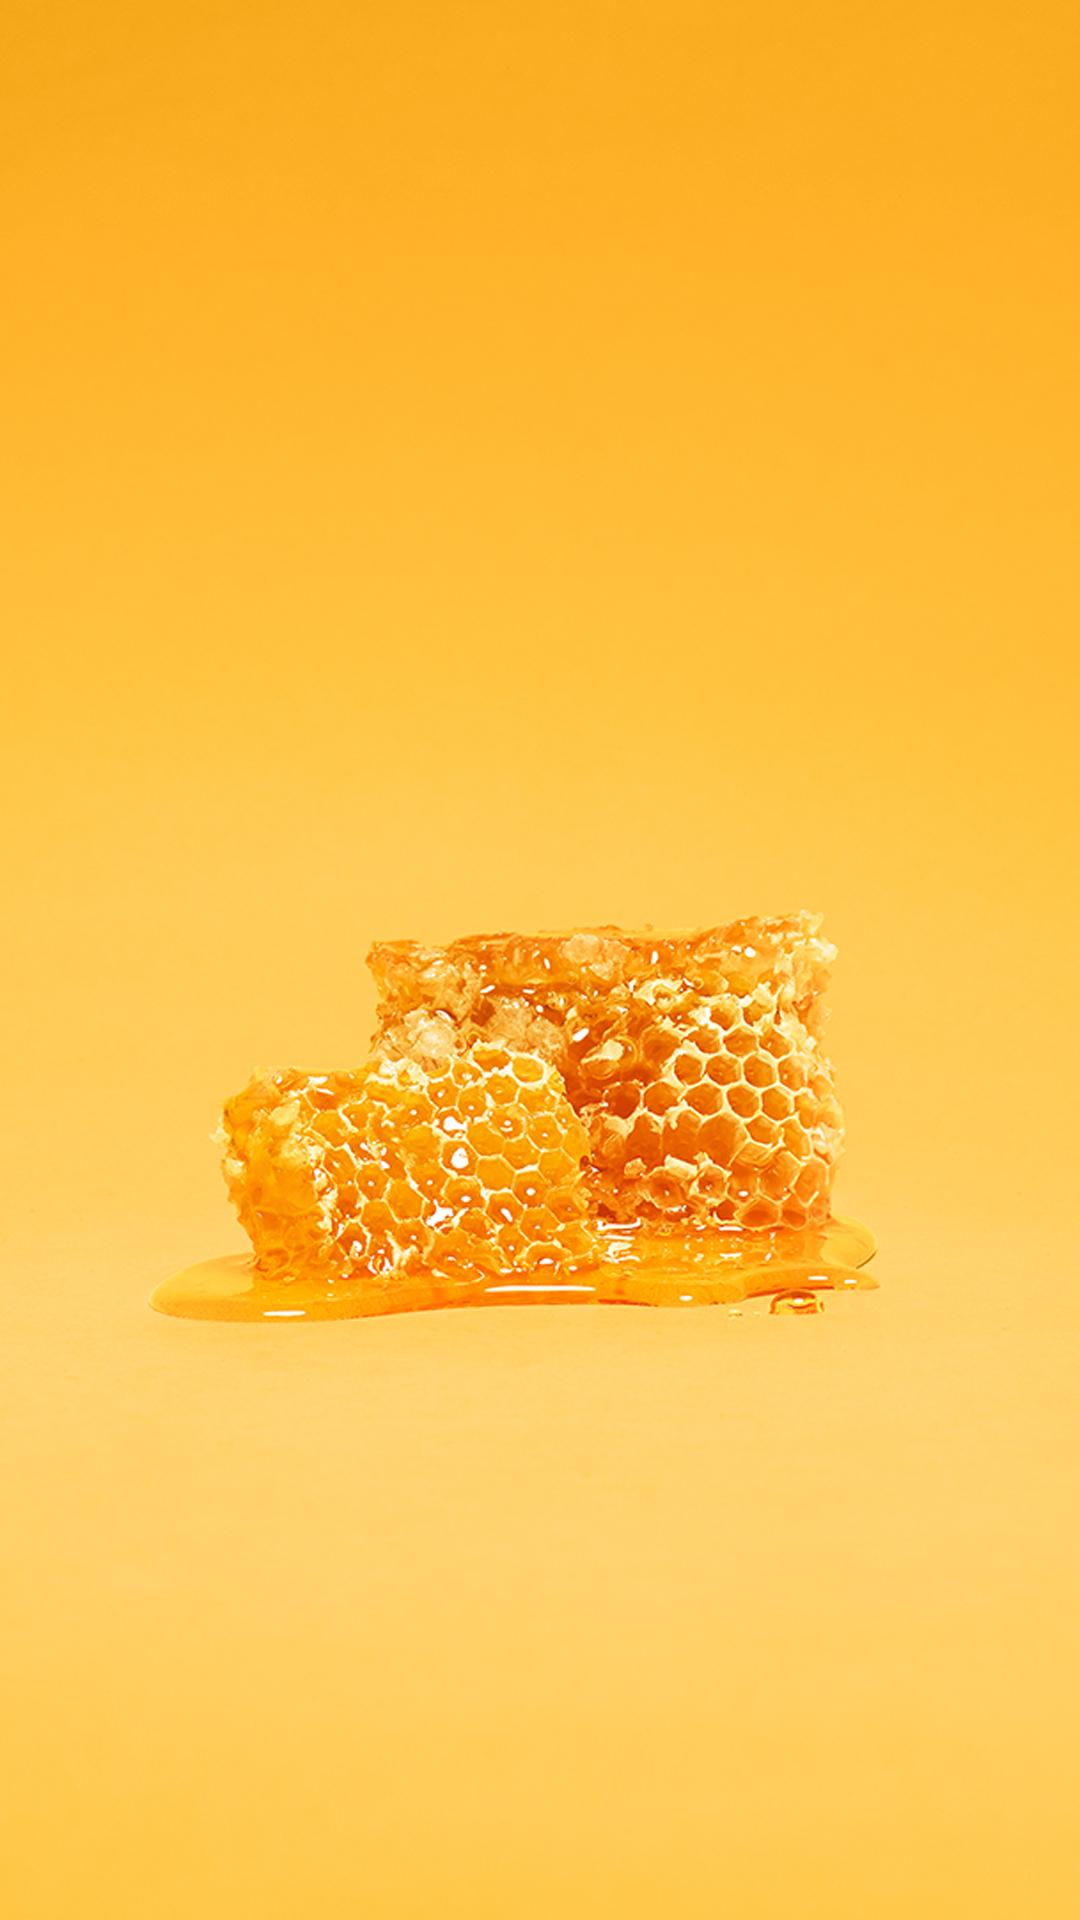 A honeycomb with honey on a yellow background - Honey